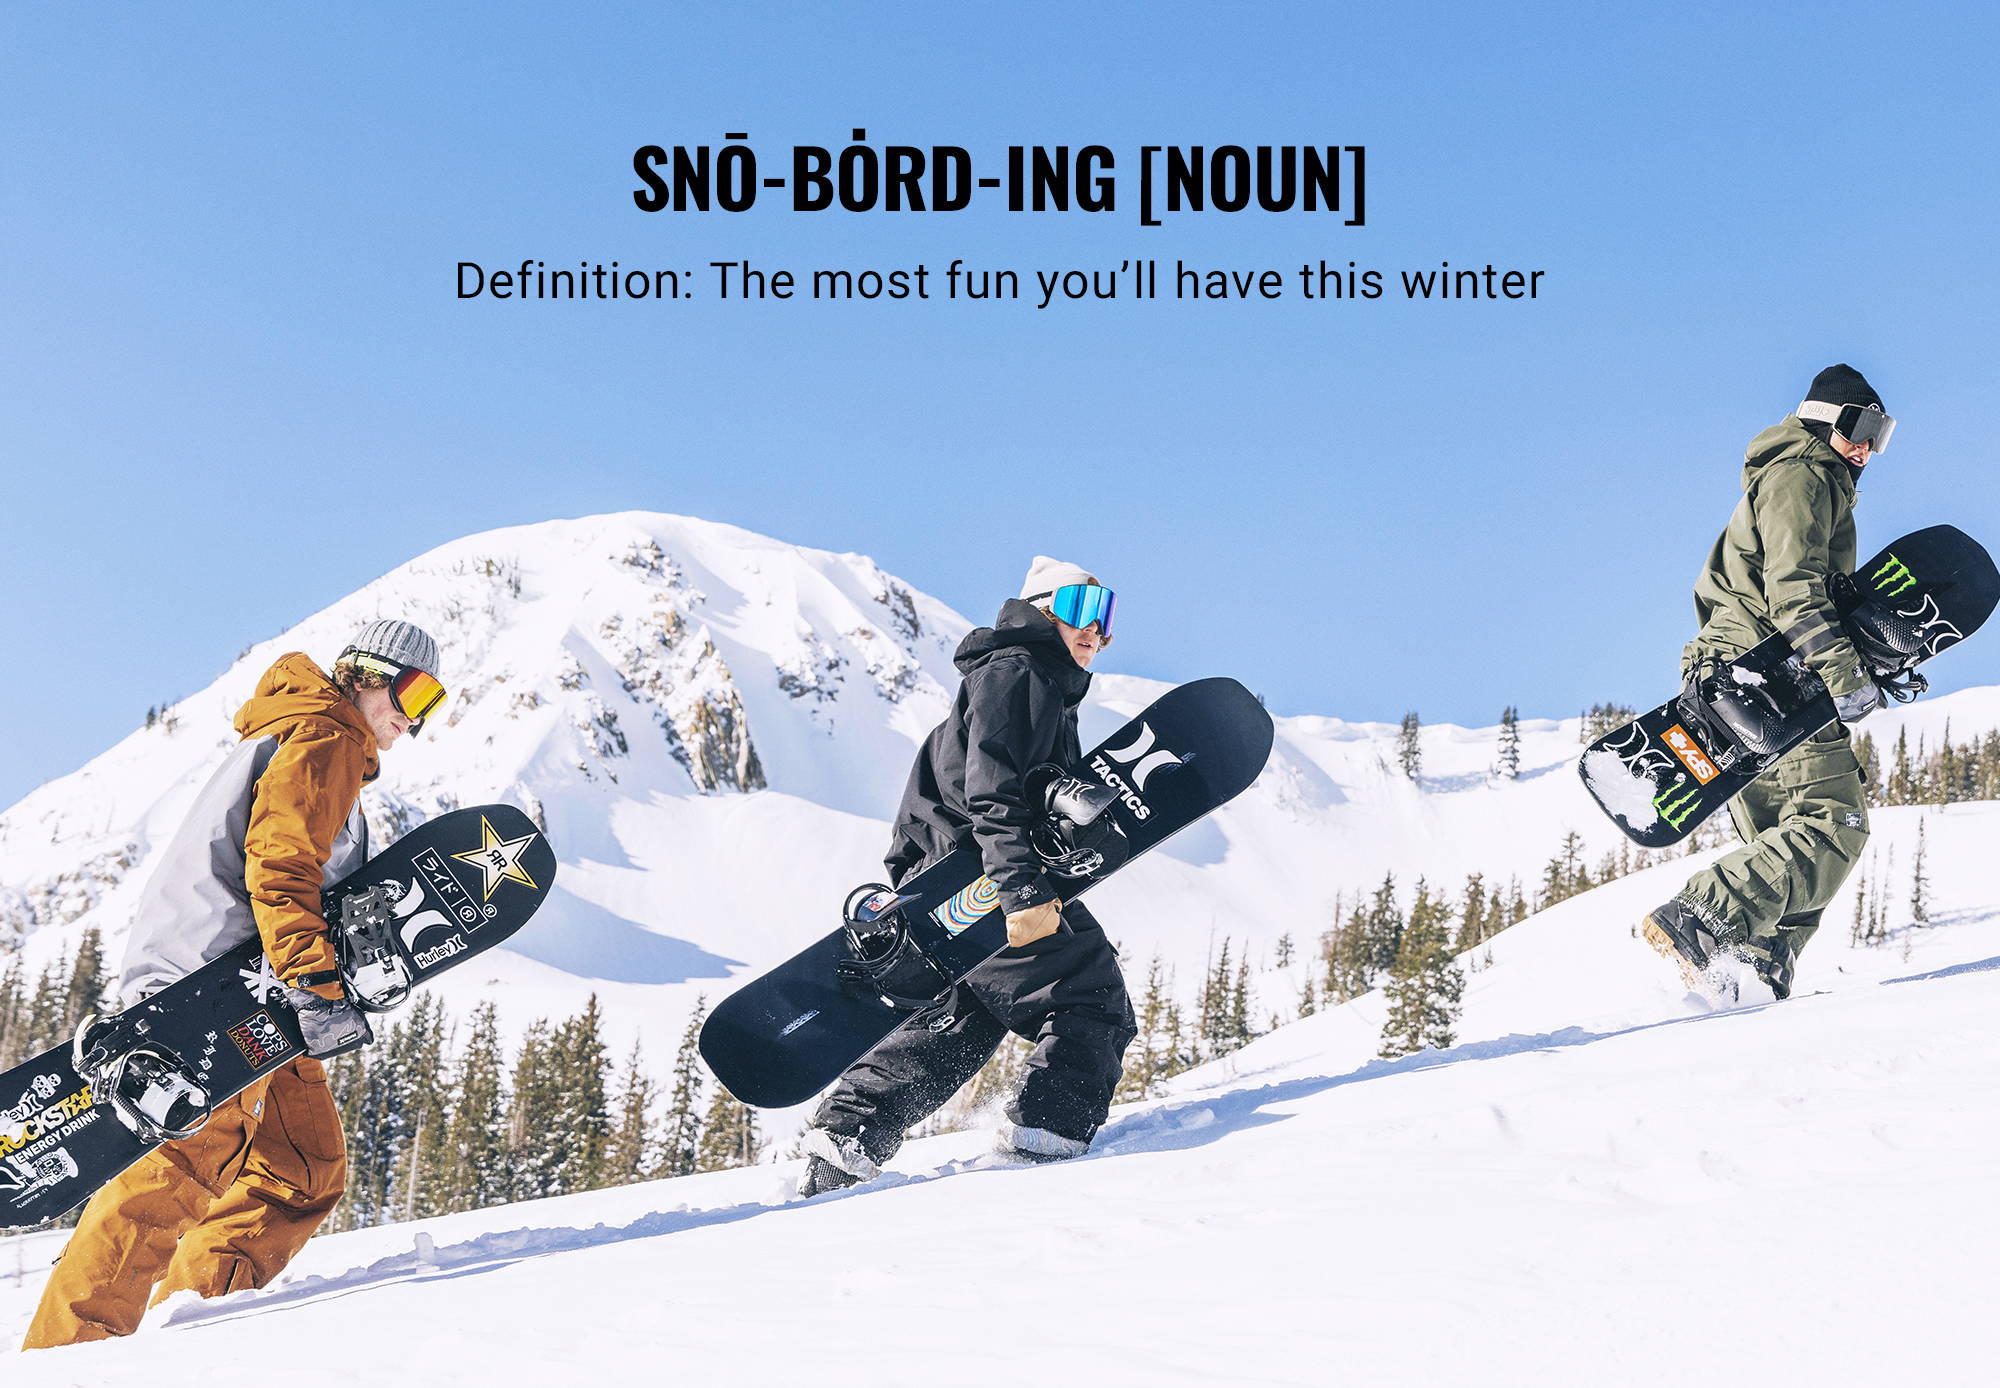 ˈSNŌ-ˌBȮRD-ING [NOUN] Definition: The most fun you’ll have this winter